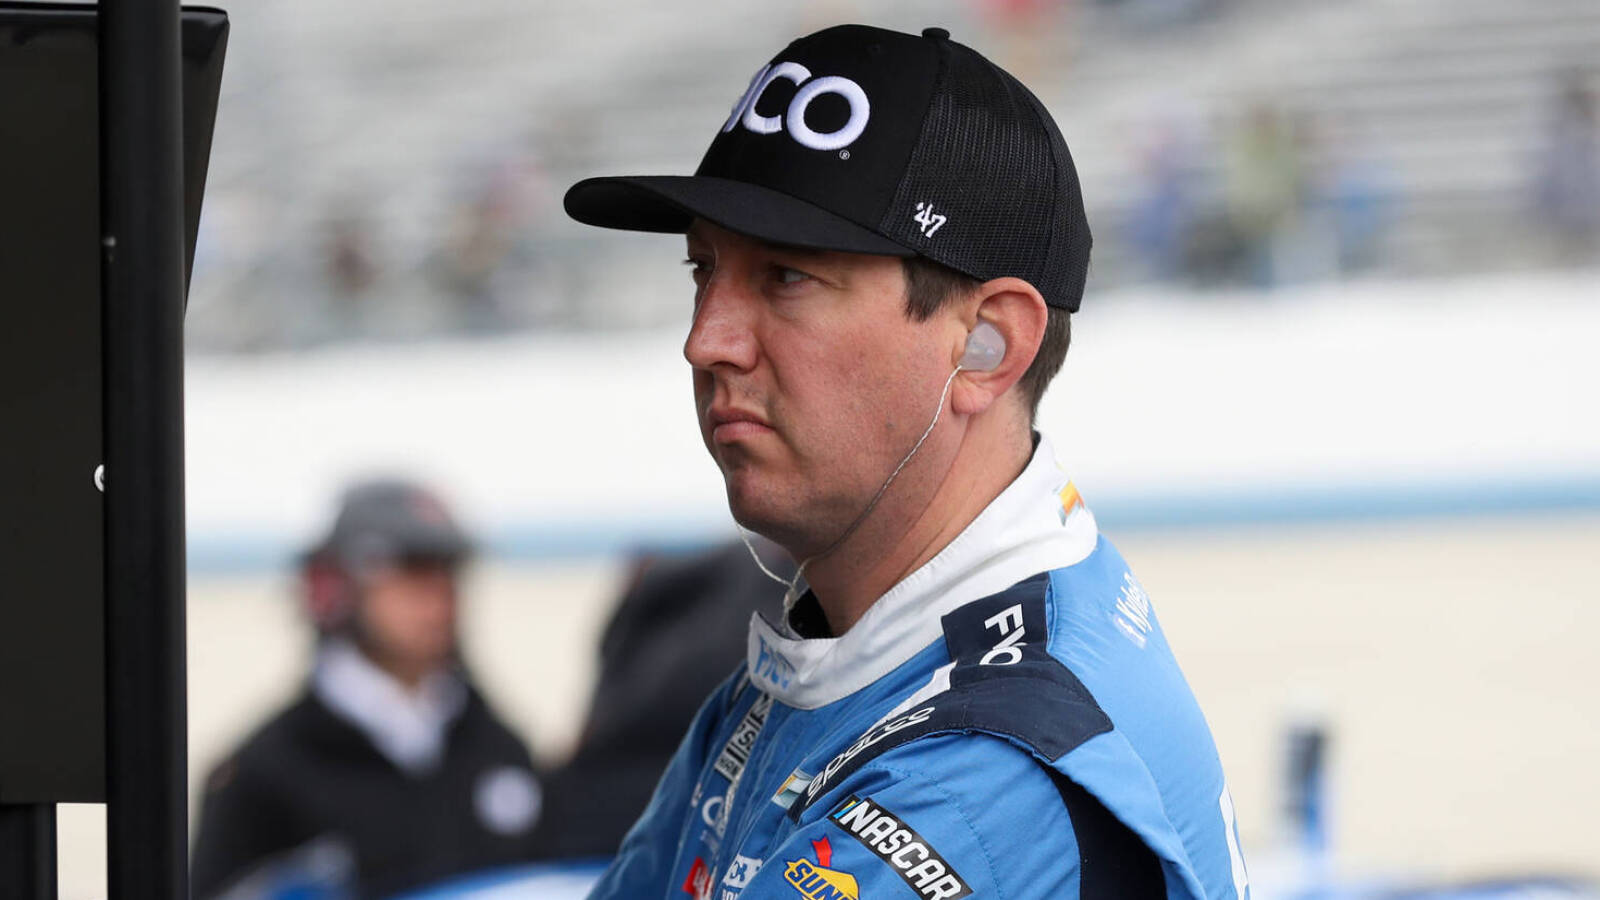 Kyle Busch also took on Ricky Stenhouse Jr.'s father in post-race scuffle